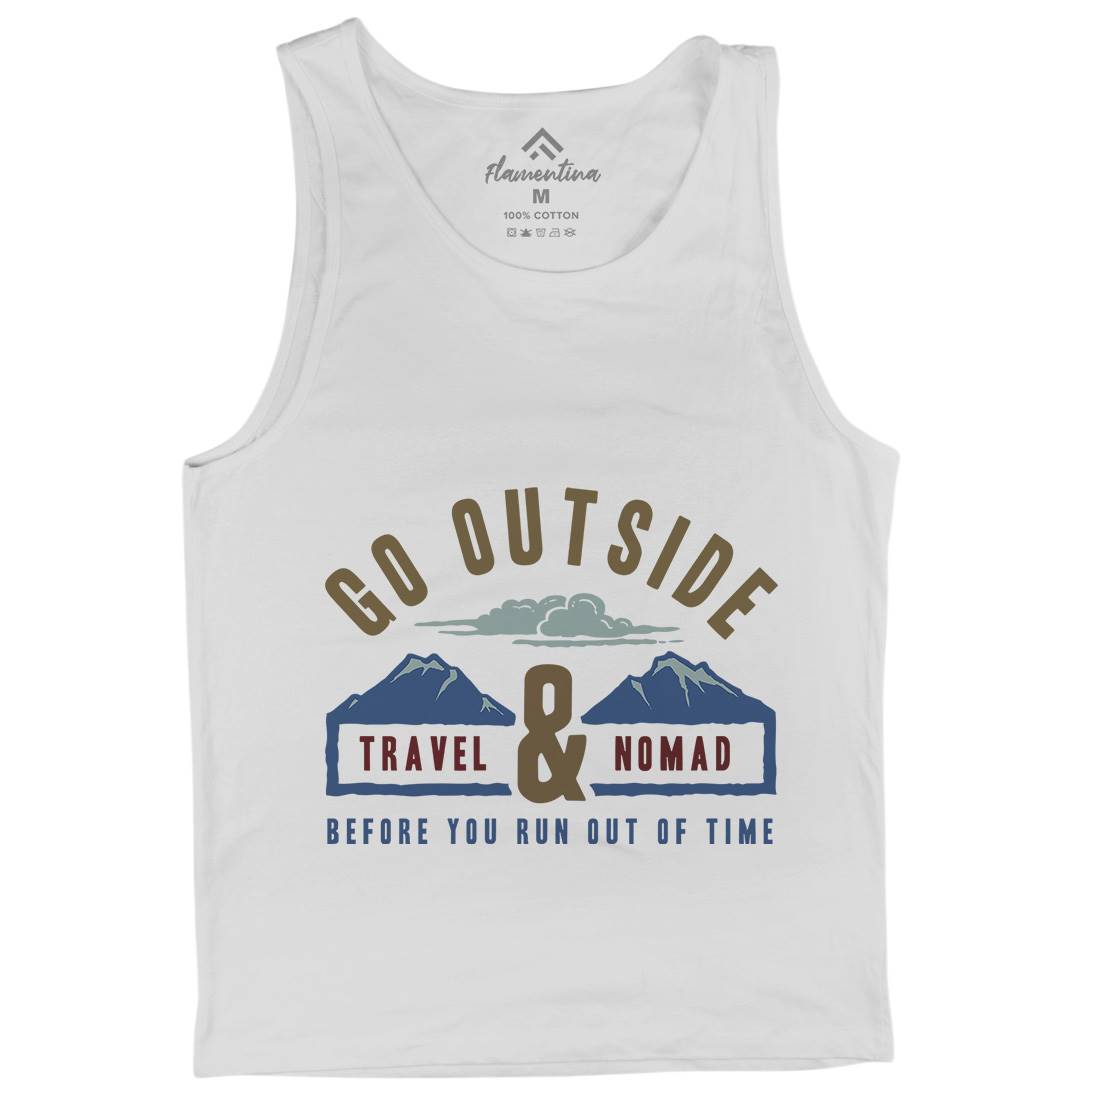 Travel And Nomad Mens Tank Top Vest Nature A388